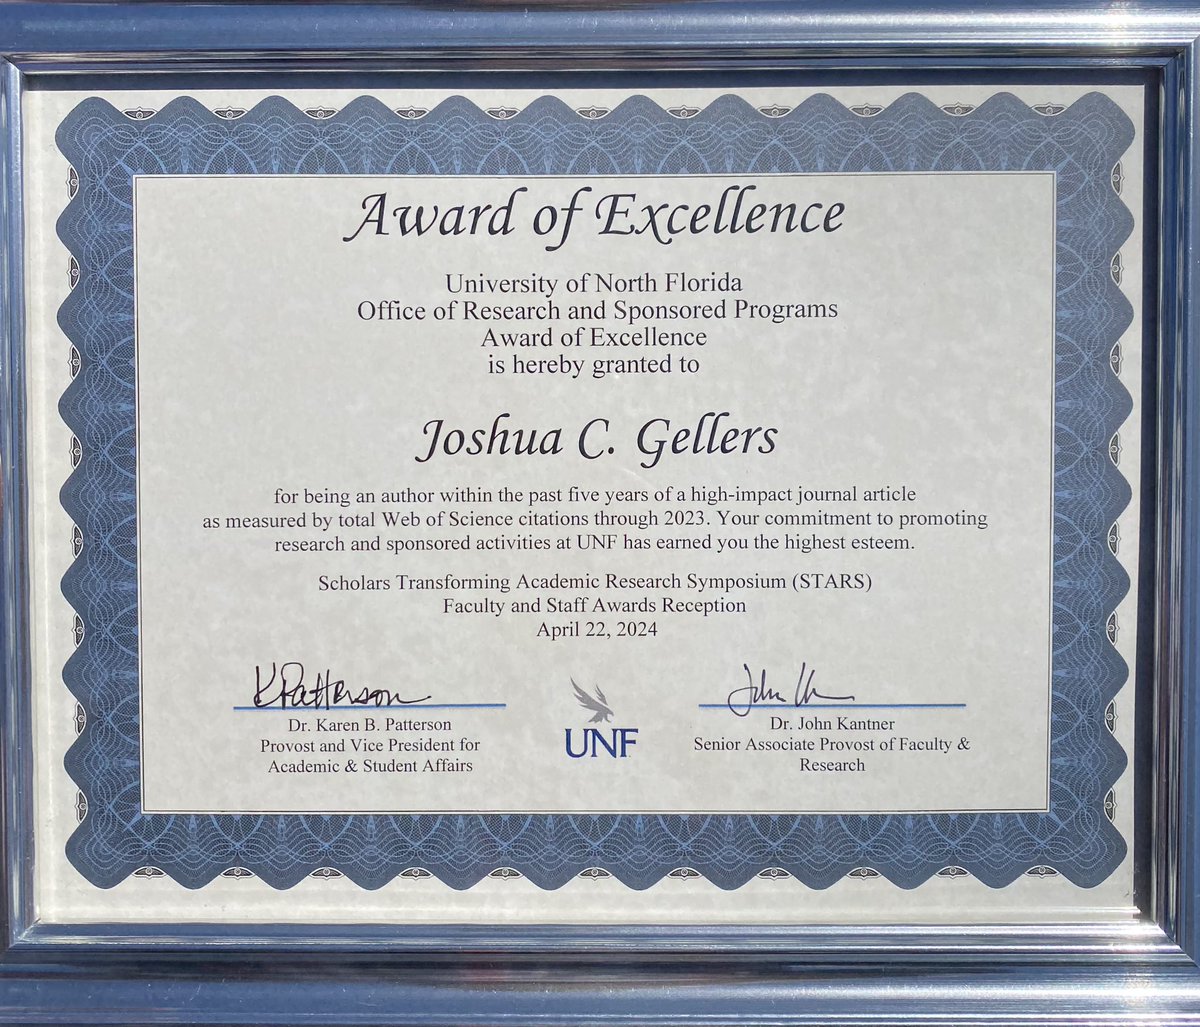 Yesterday I received the high-impact research article award from @UofNorthFlorida for my co-authored piece in @ESG_Journal, “Earth system law: Exploring new frontiers in legal science.” Thanks to UNF for recognizing my research & to all my terrific co-authors (1/2).